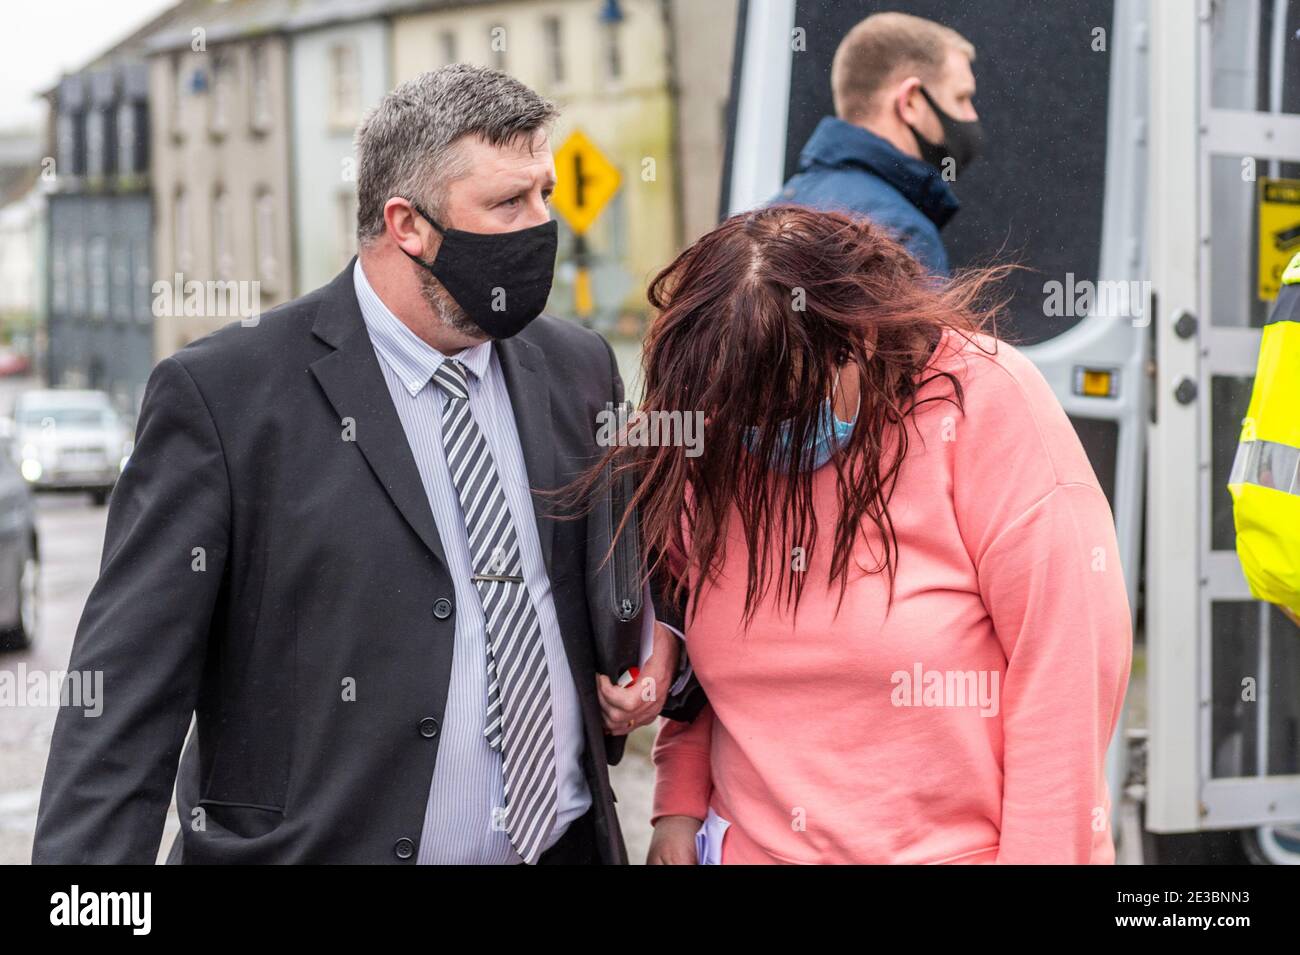 Bandon, West Cork, Ireland. 18th Jan, 2021. The two people charged with ...